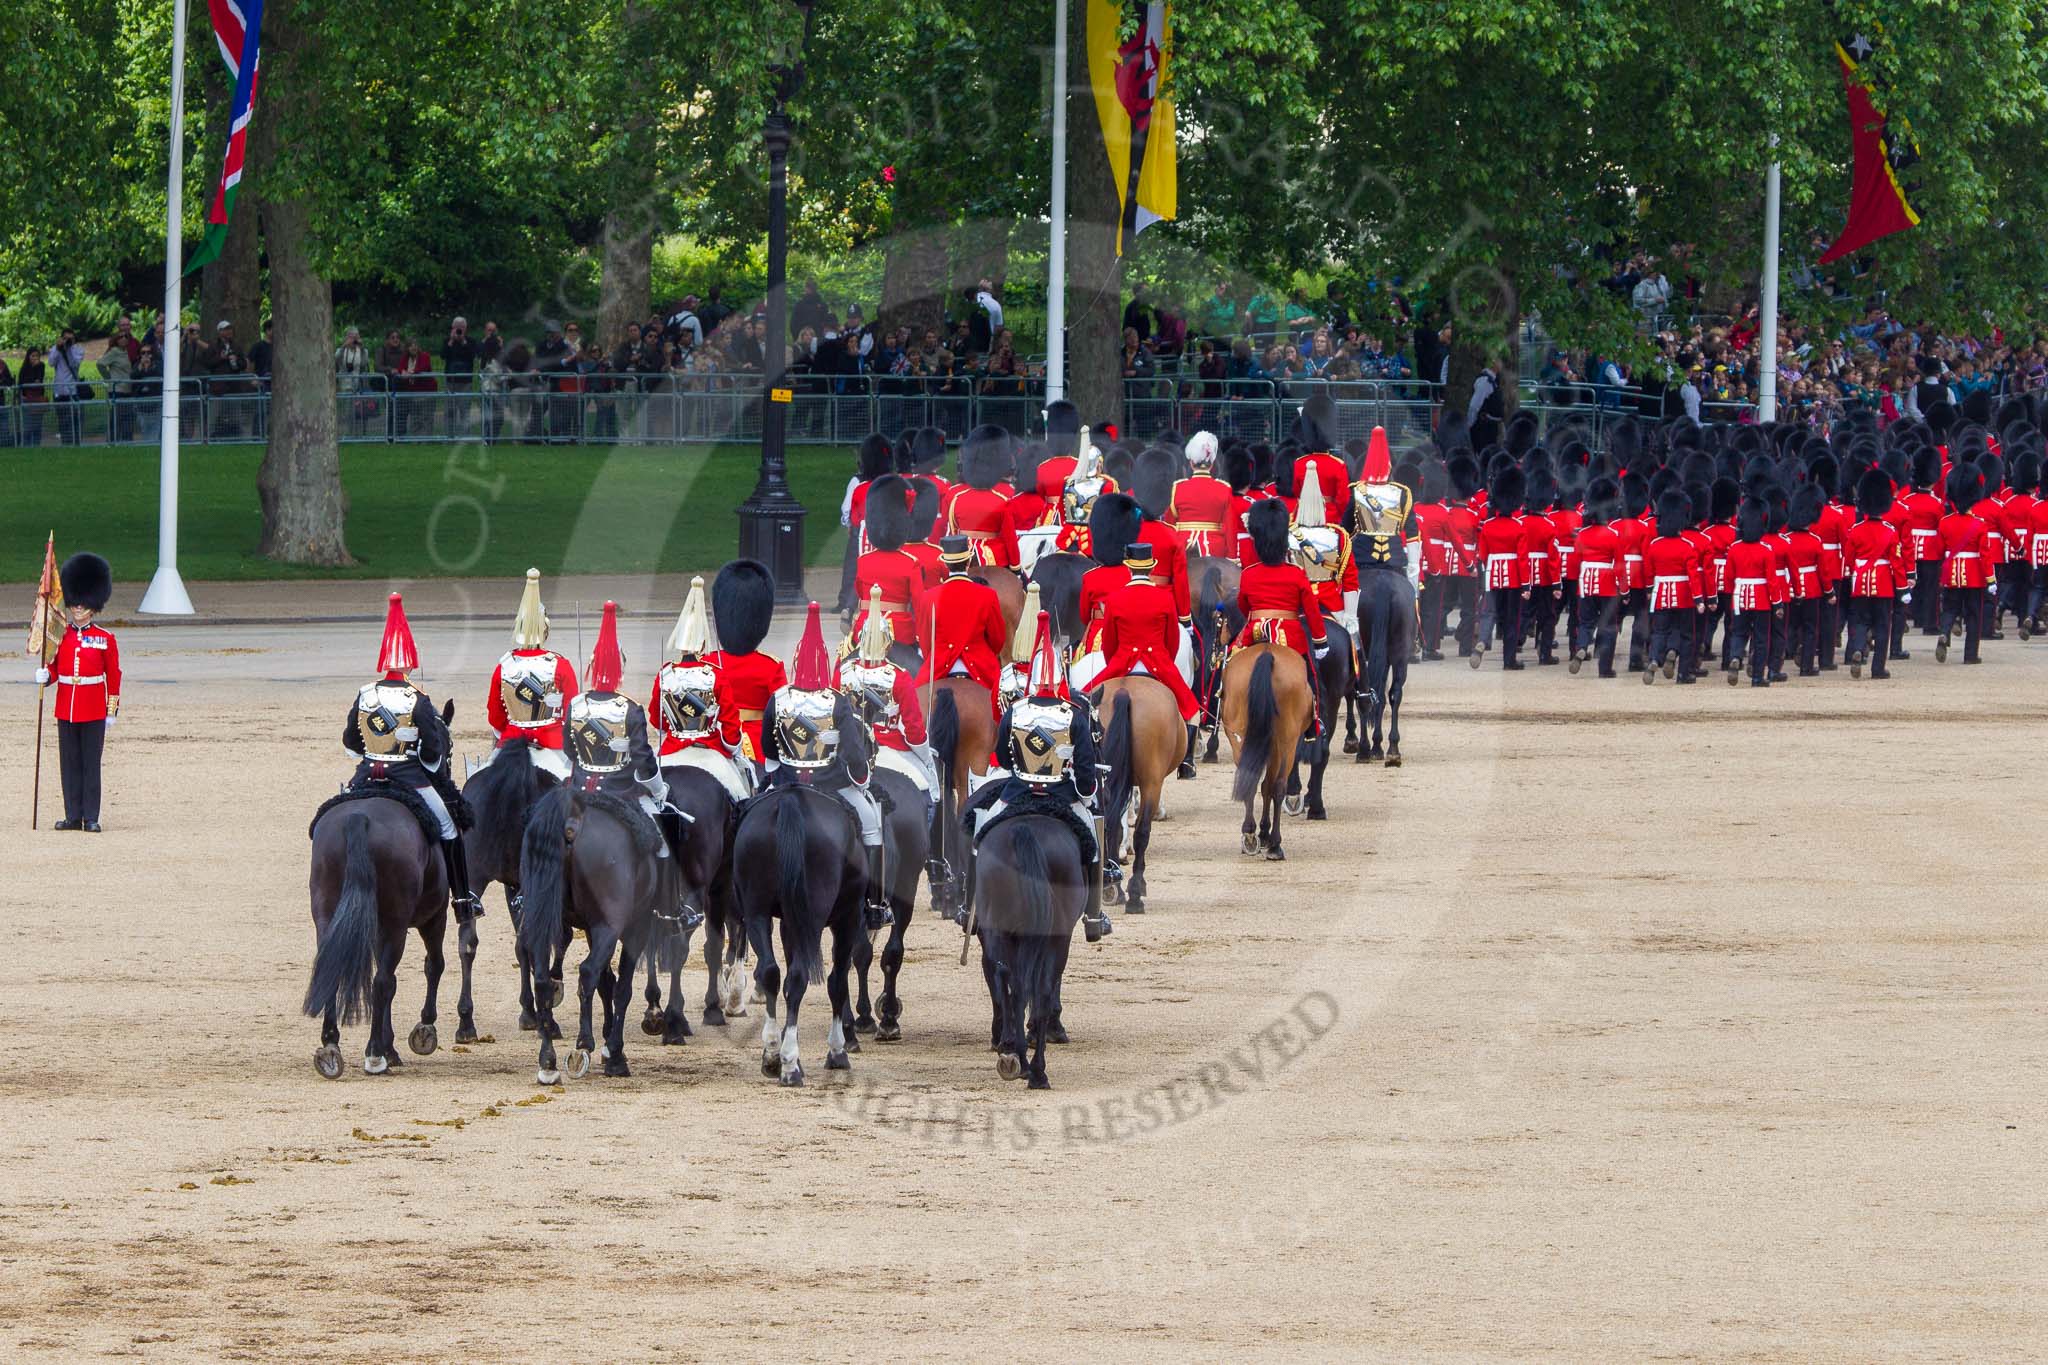 The Colonel's Review 2013.
Horse Guards Parade, Westminster,
London SW1,

United Kingdom,
on 08 June 2013 at 12:11, image #870